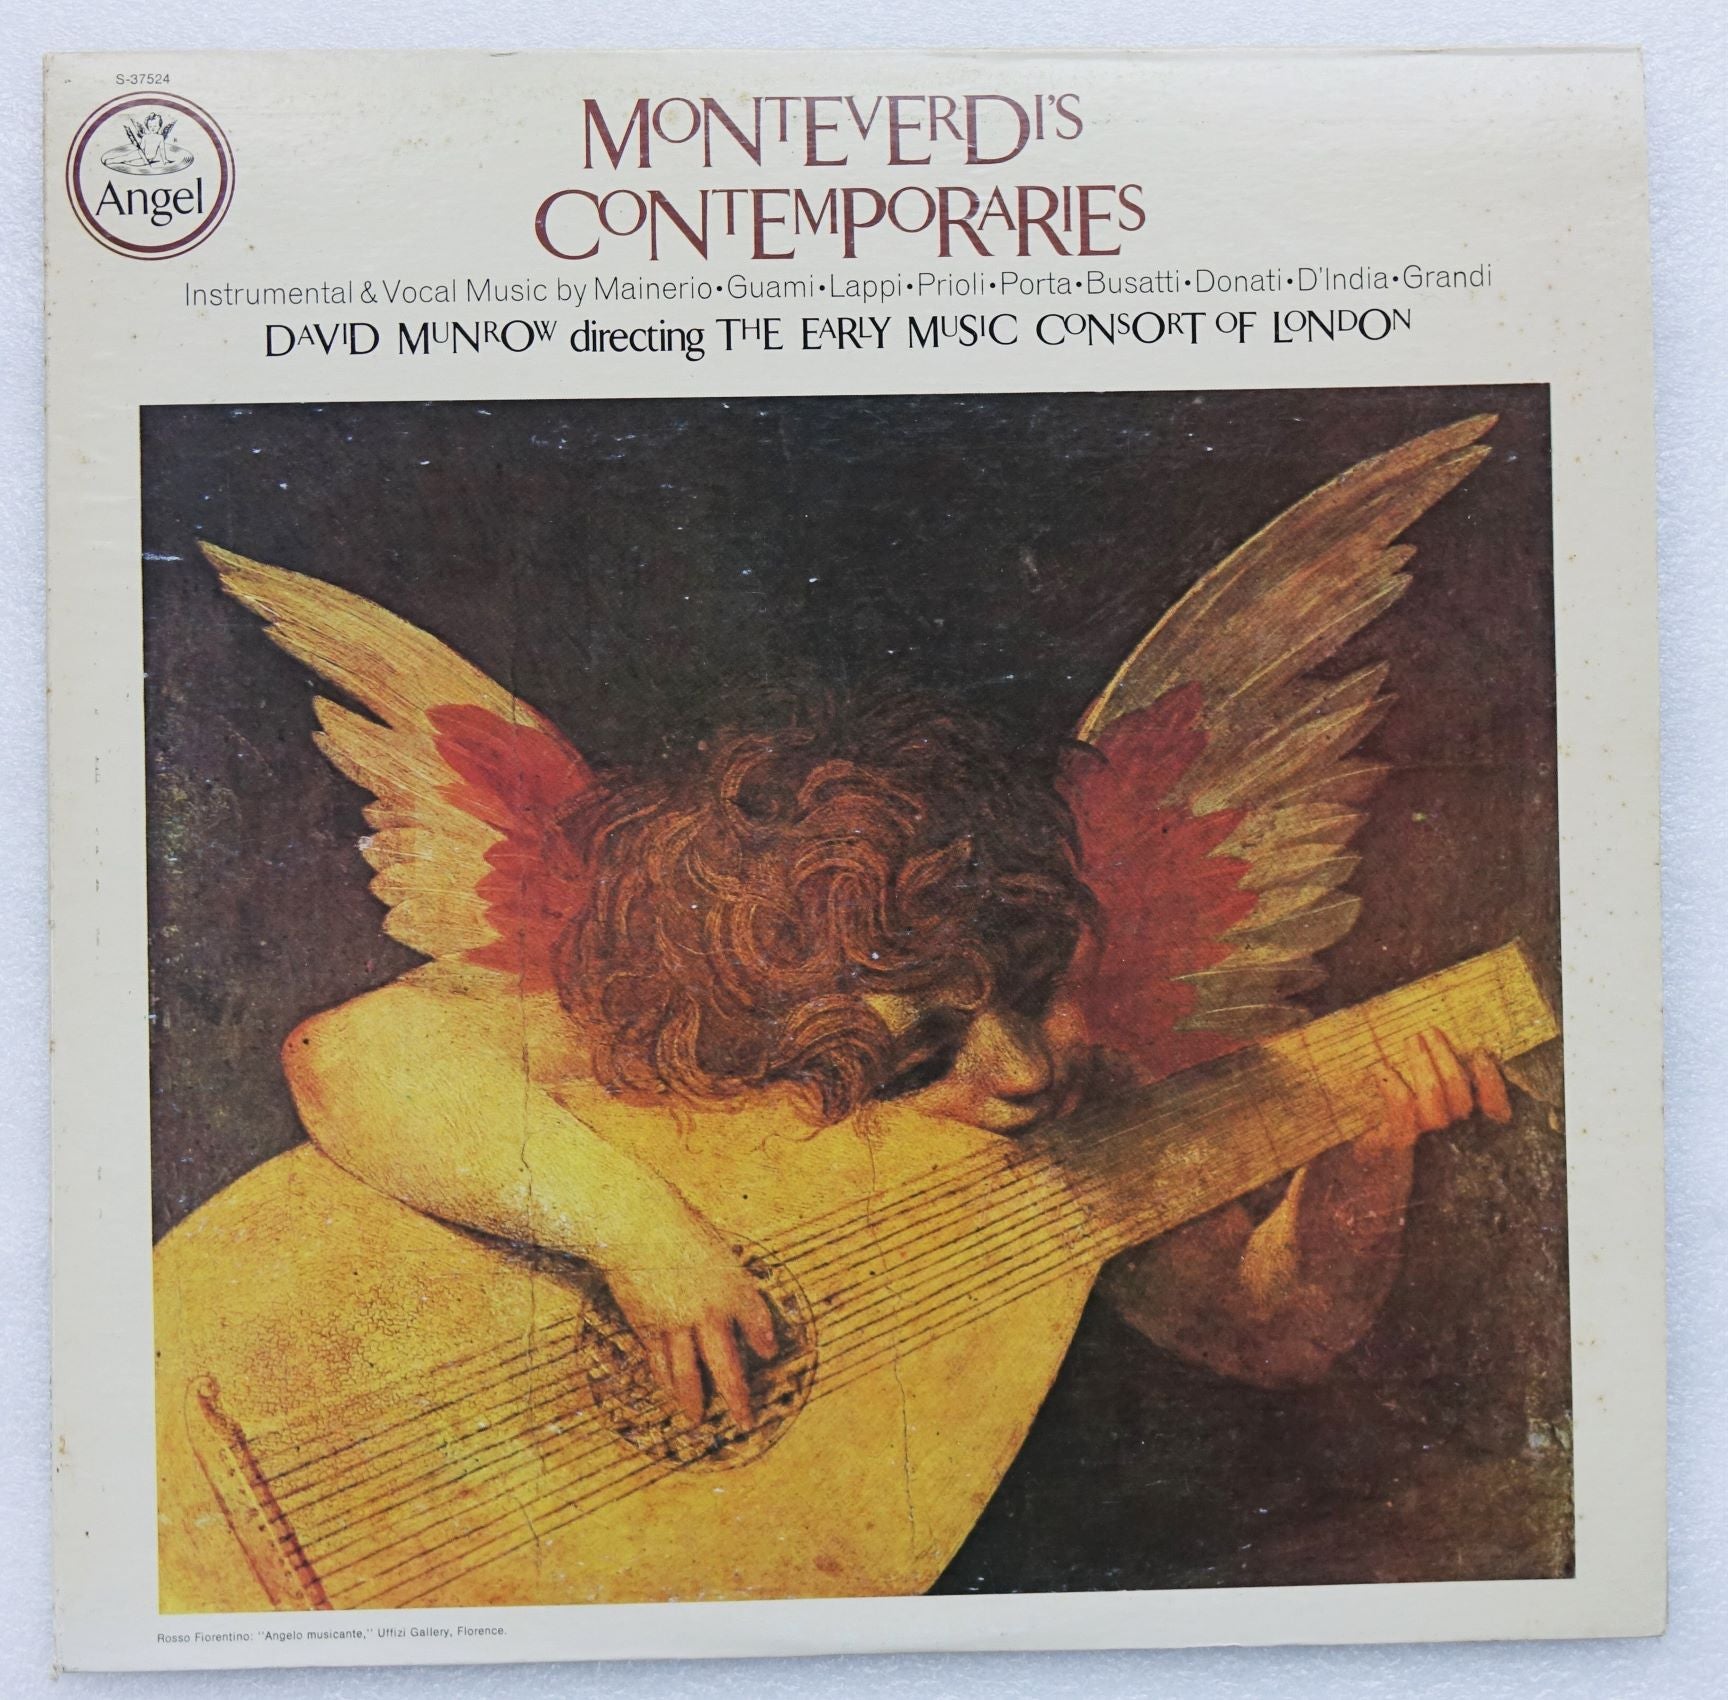 ANG009: The Music of Monteverdi's Contemporaries